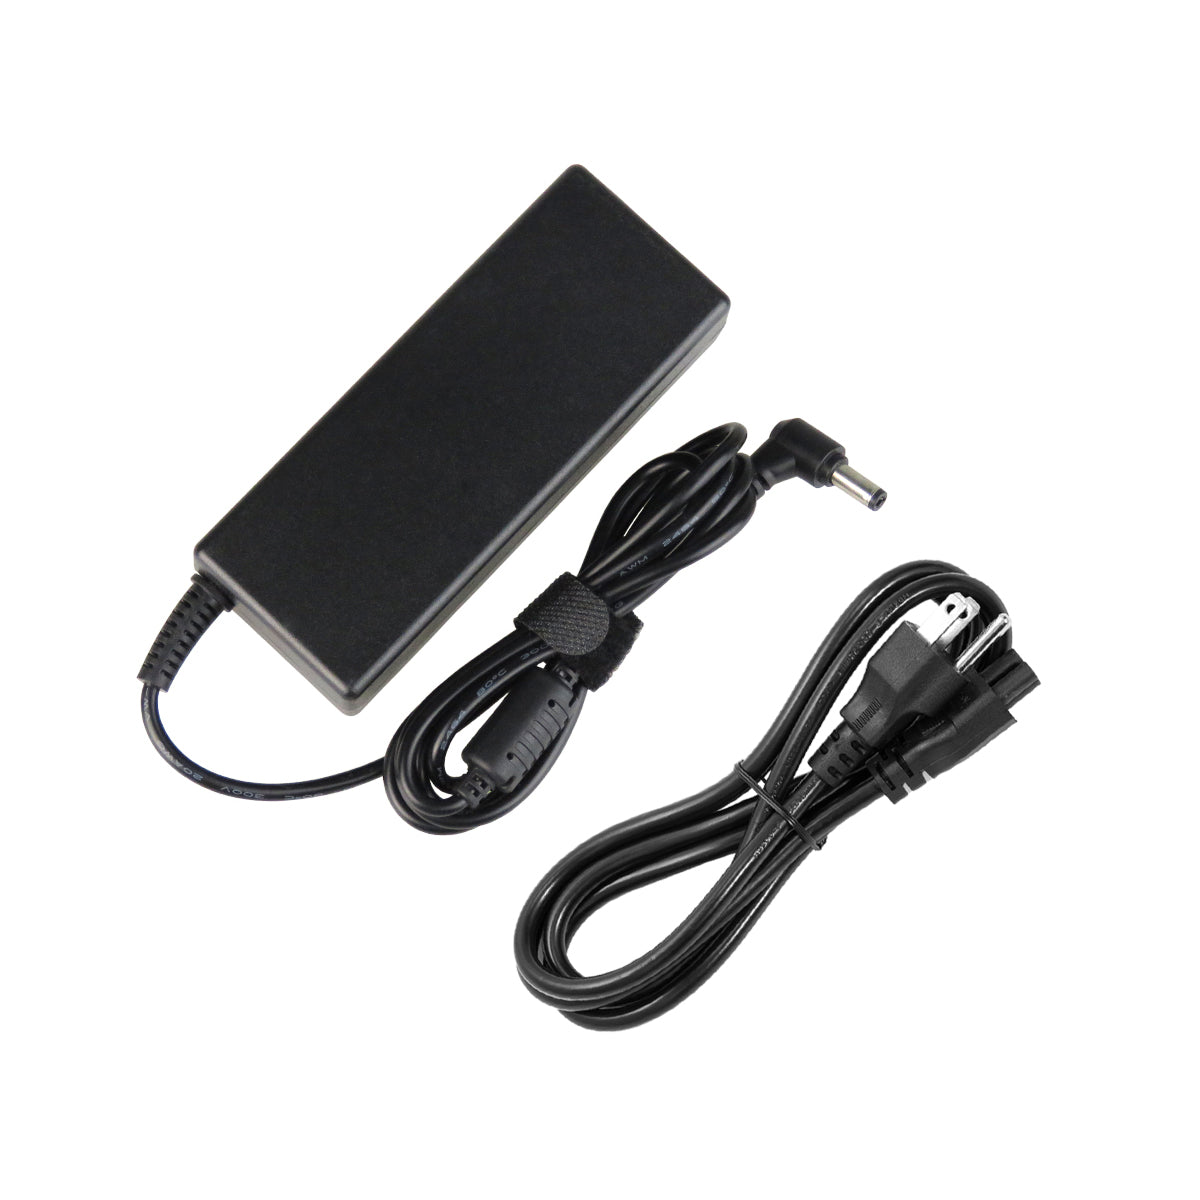 AC Adapter Charger for ASUS X54H-SX136D Notebook.